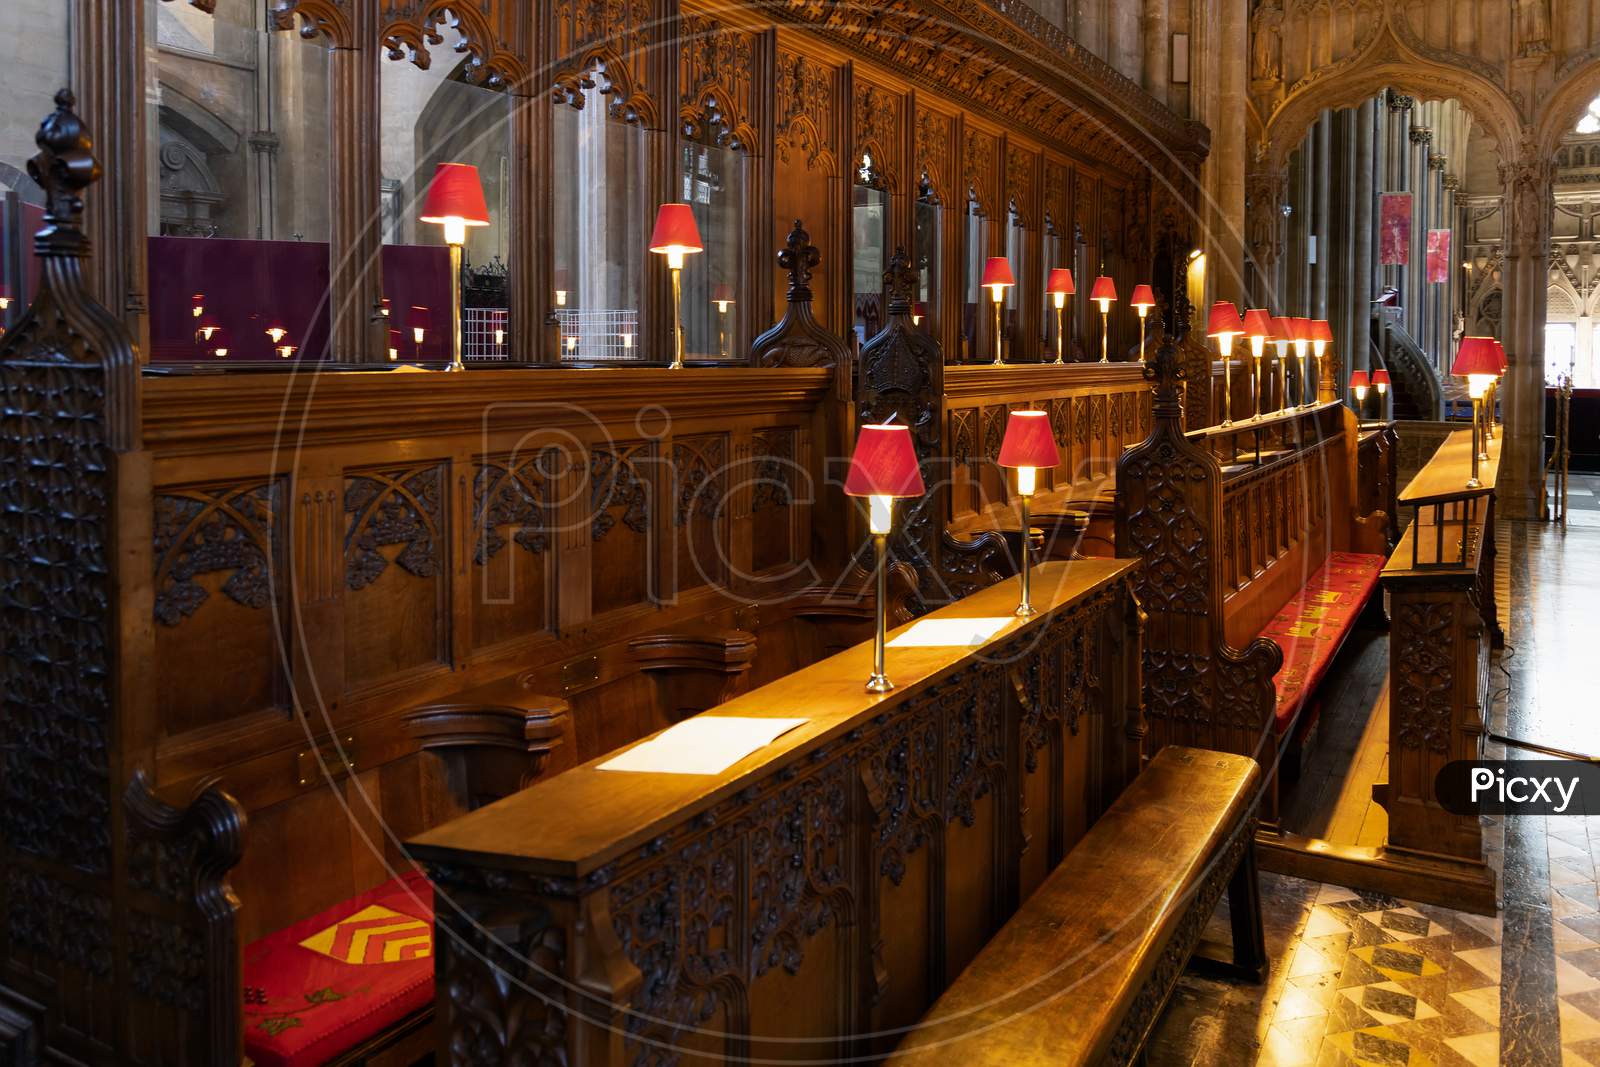 Bristol, Uk - May 14 : View Of The Chancel In The Cathedral In Bristol On May 14, 2019